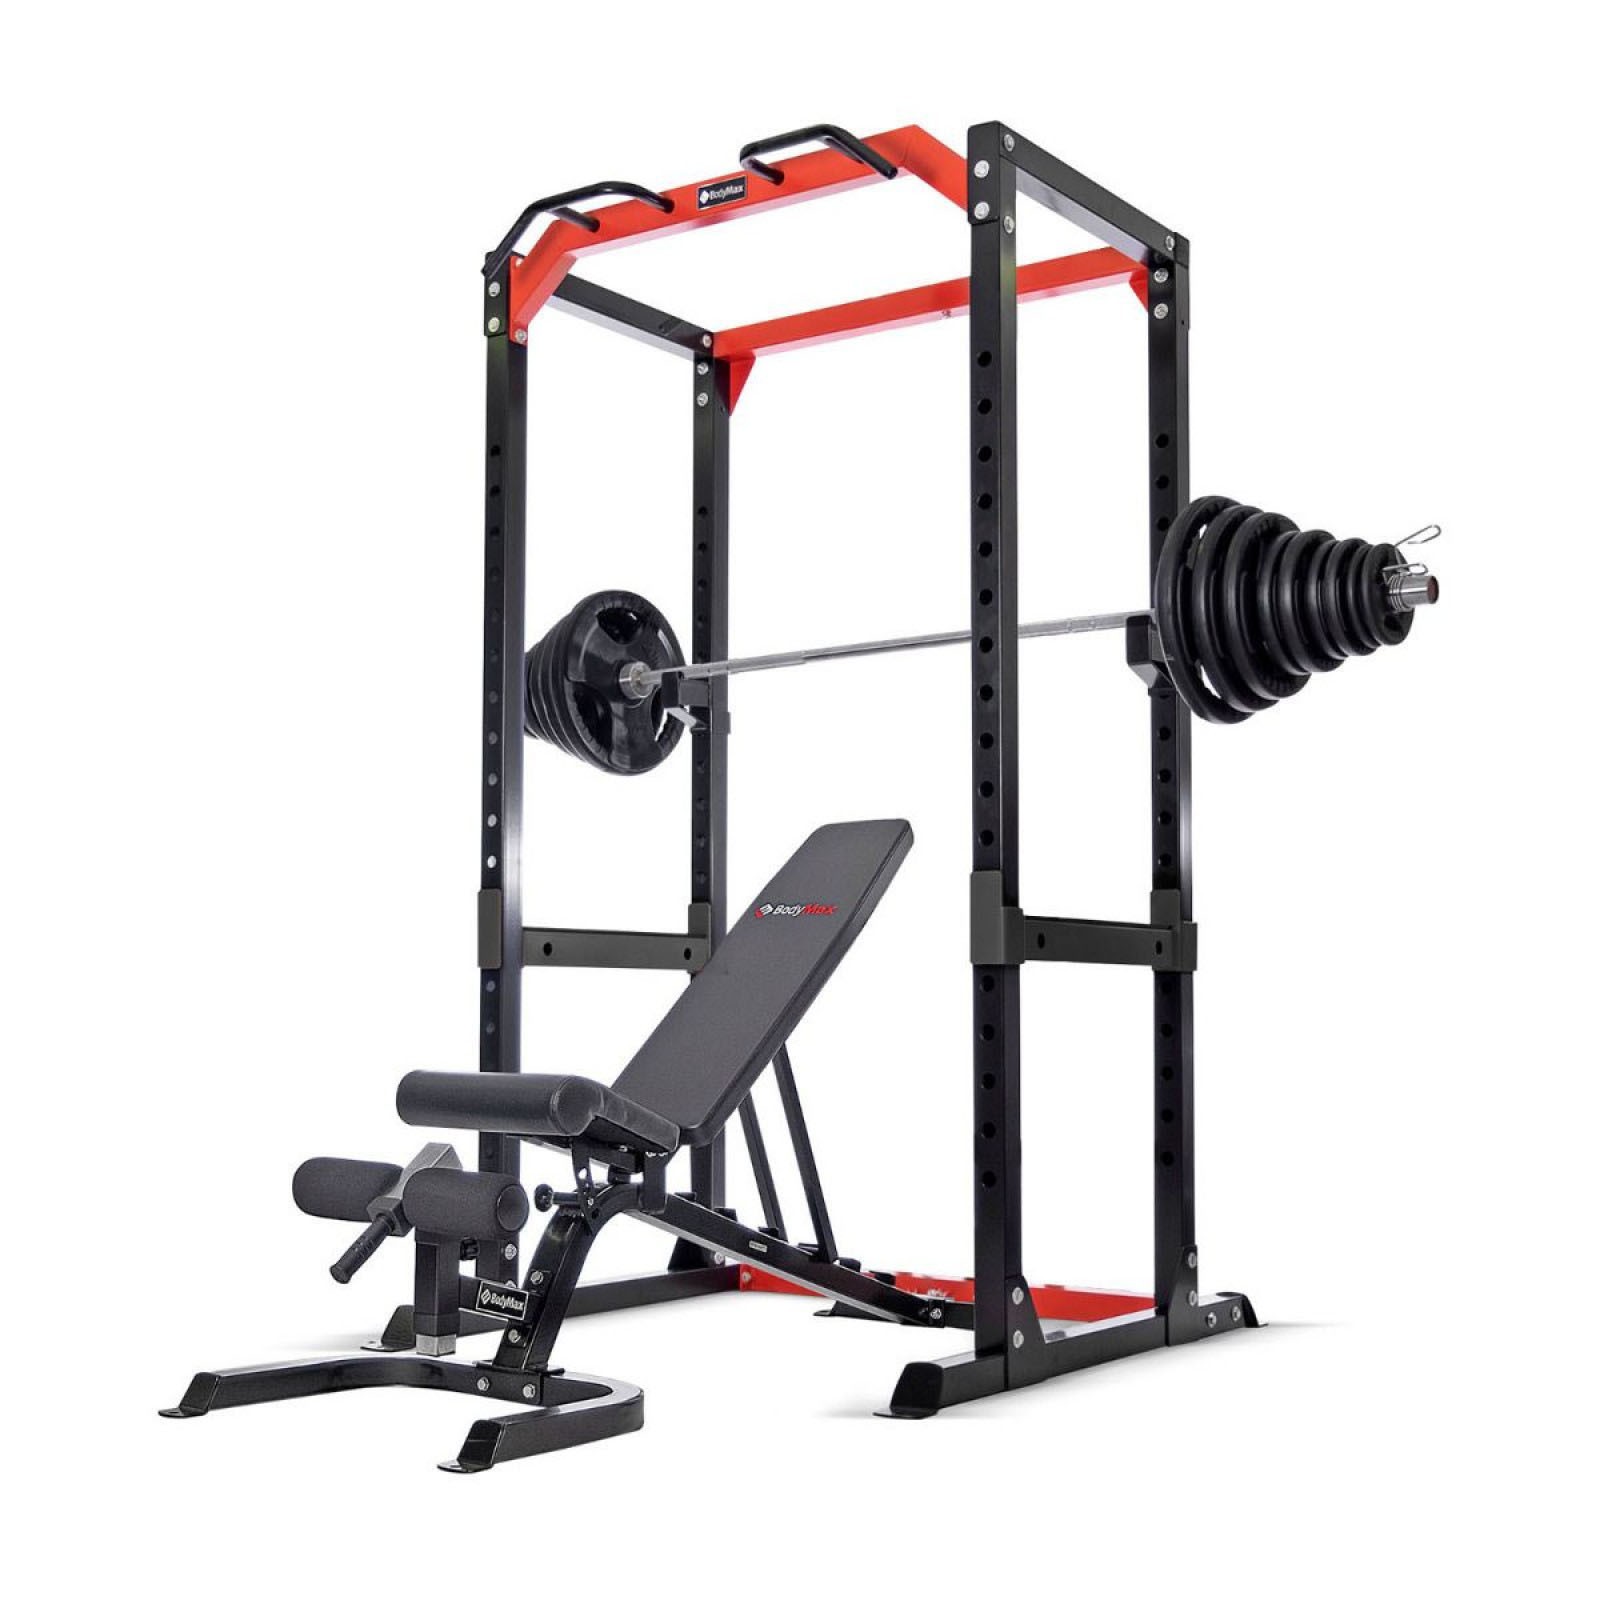 Bodymax Cf485 Power Rack With 145kg Rubber Olympic Weight Kit And Bodymax Cf430 Bench Powerhouse Fitness